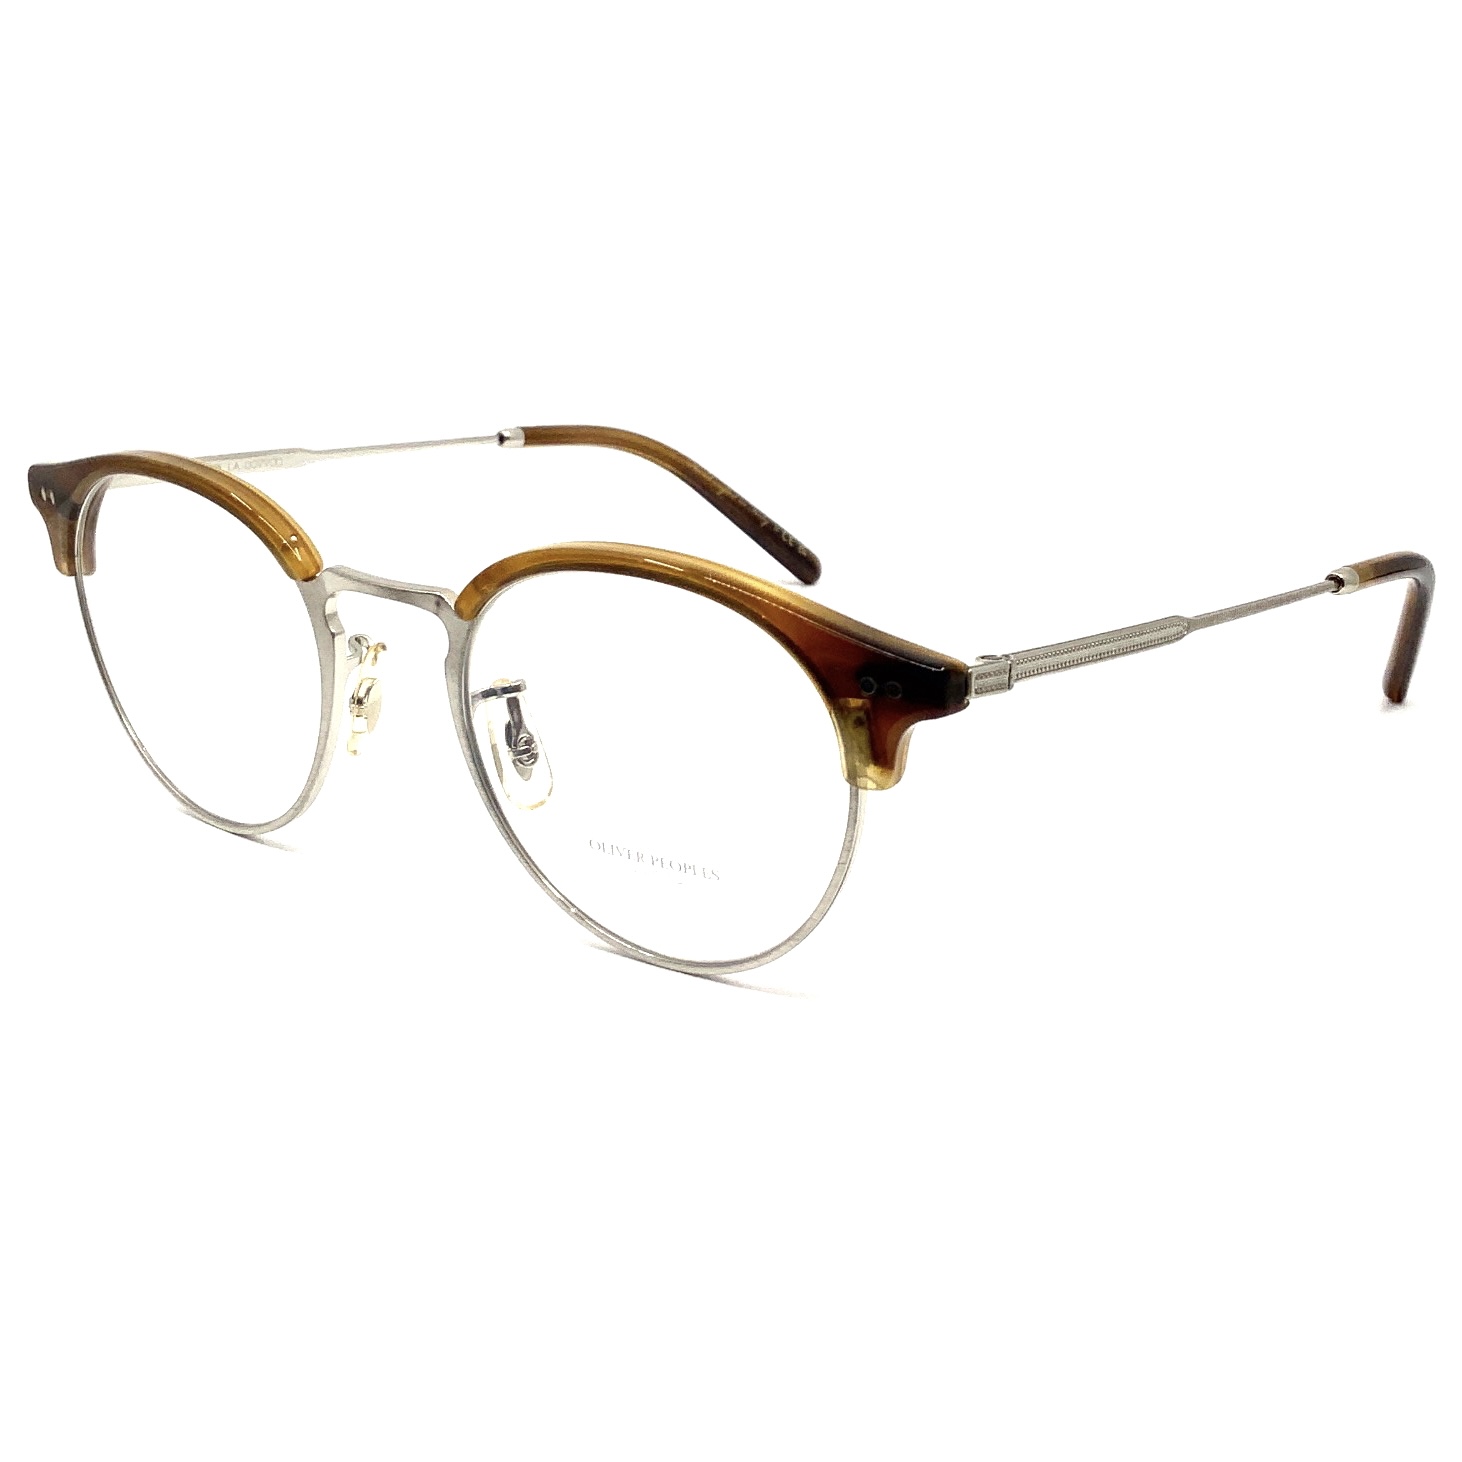 OLIVER PEOPLES】 REILAND 調光レンズフレーム形ブロー - 小物